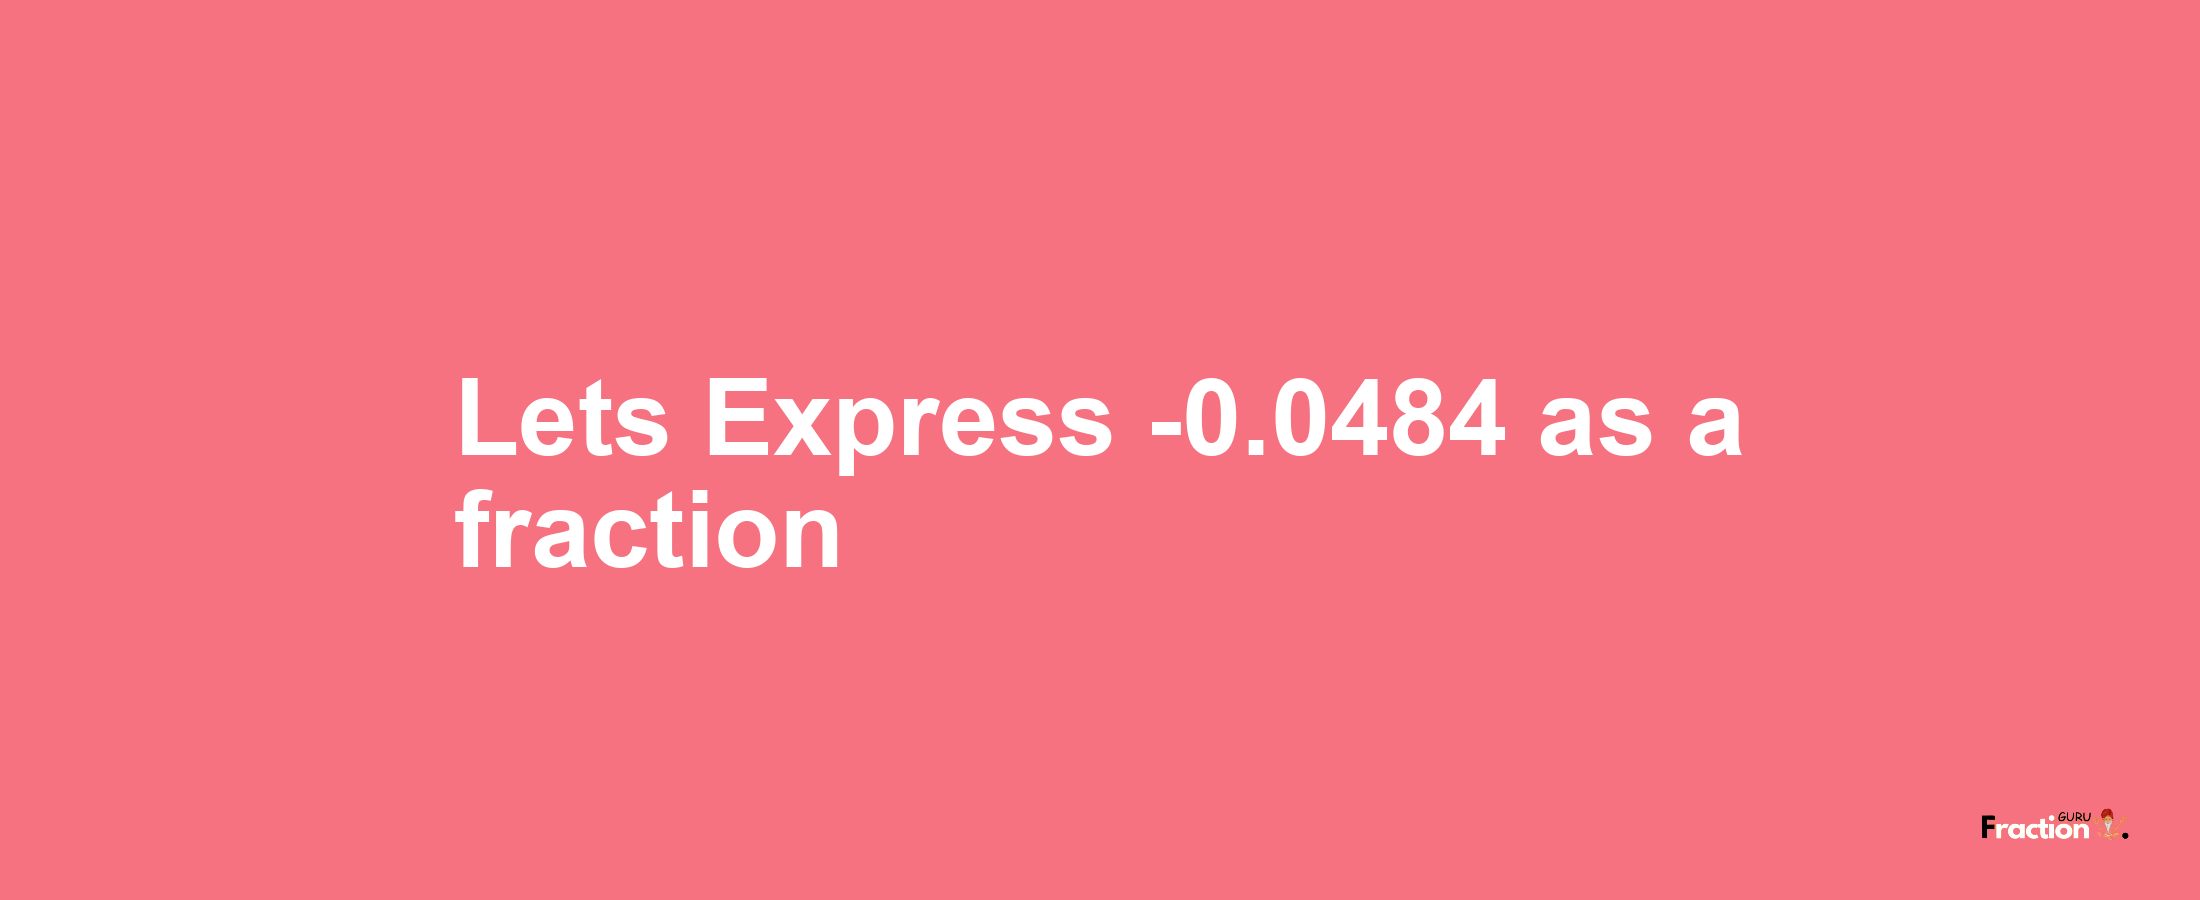 Lets Express -0.0484 as afraction